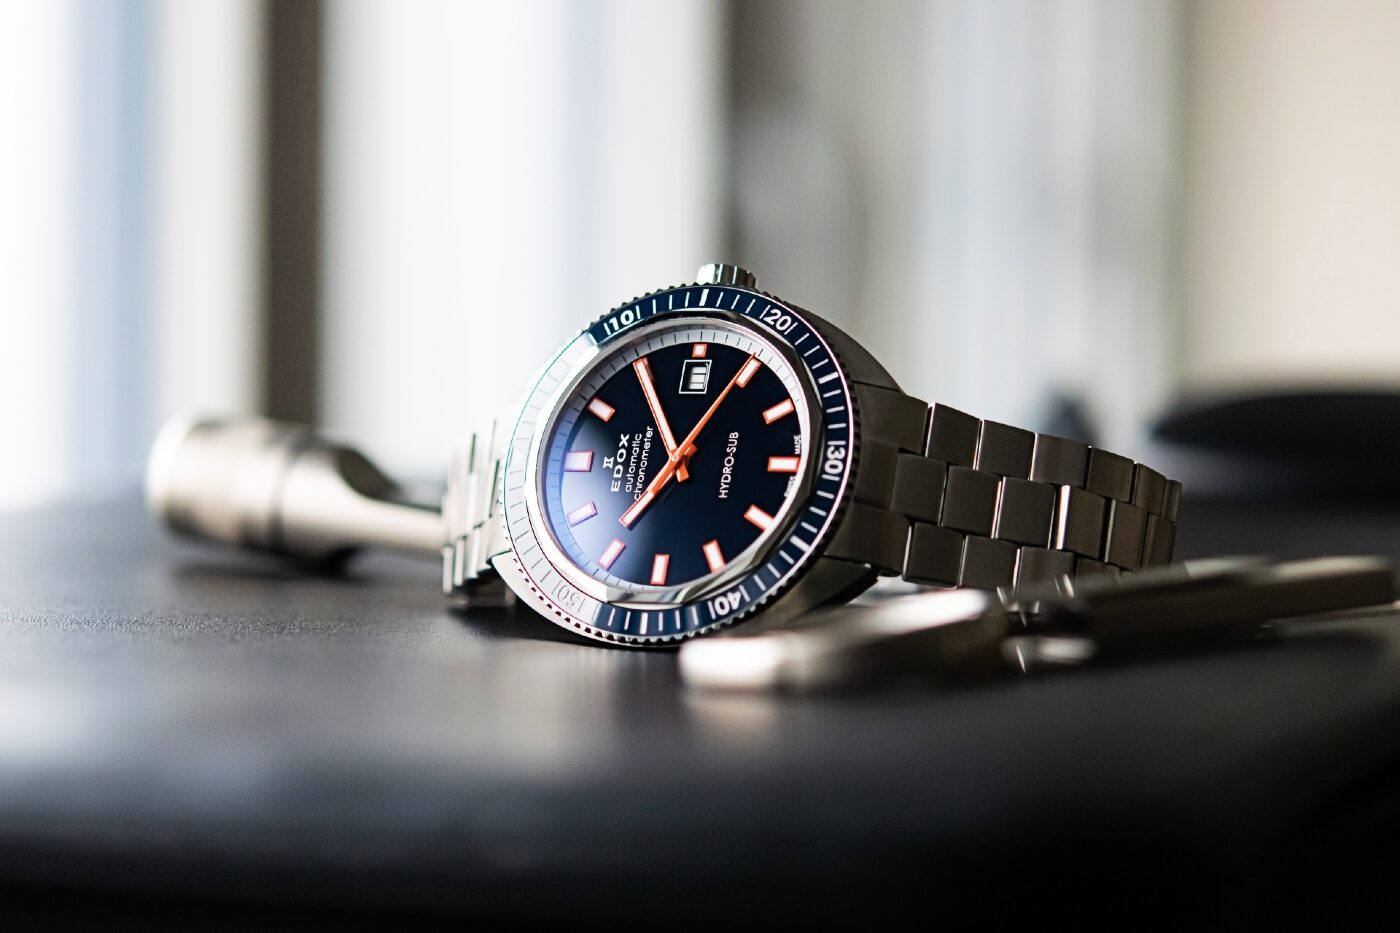 The Hydro-Sub Automatic Chronometer Limited Edition